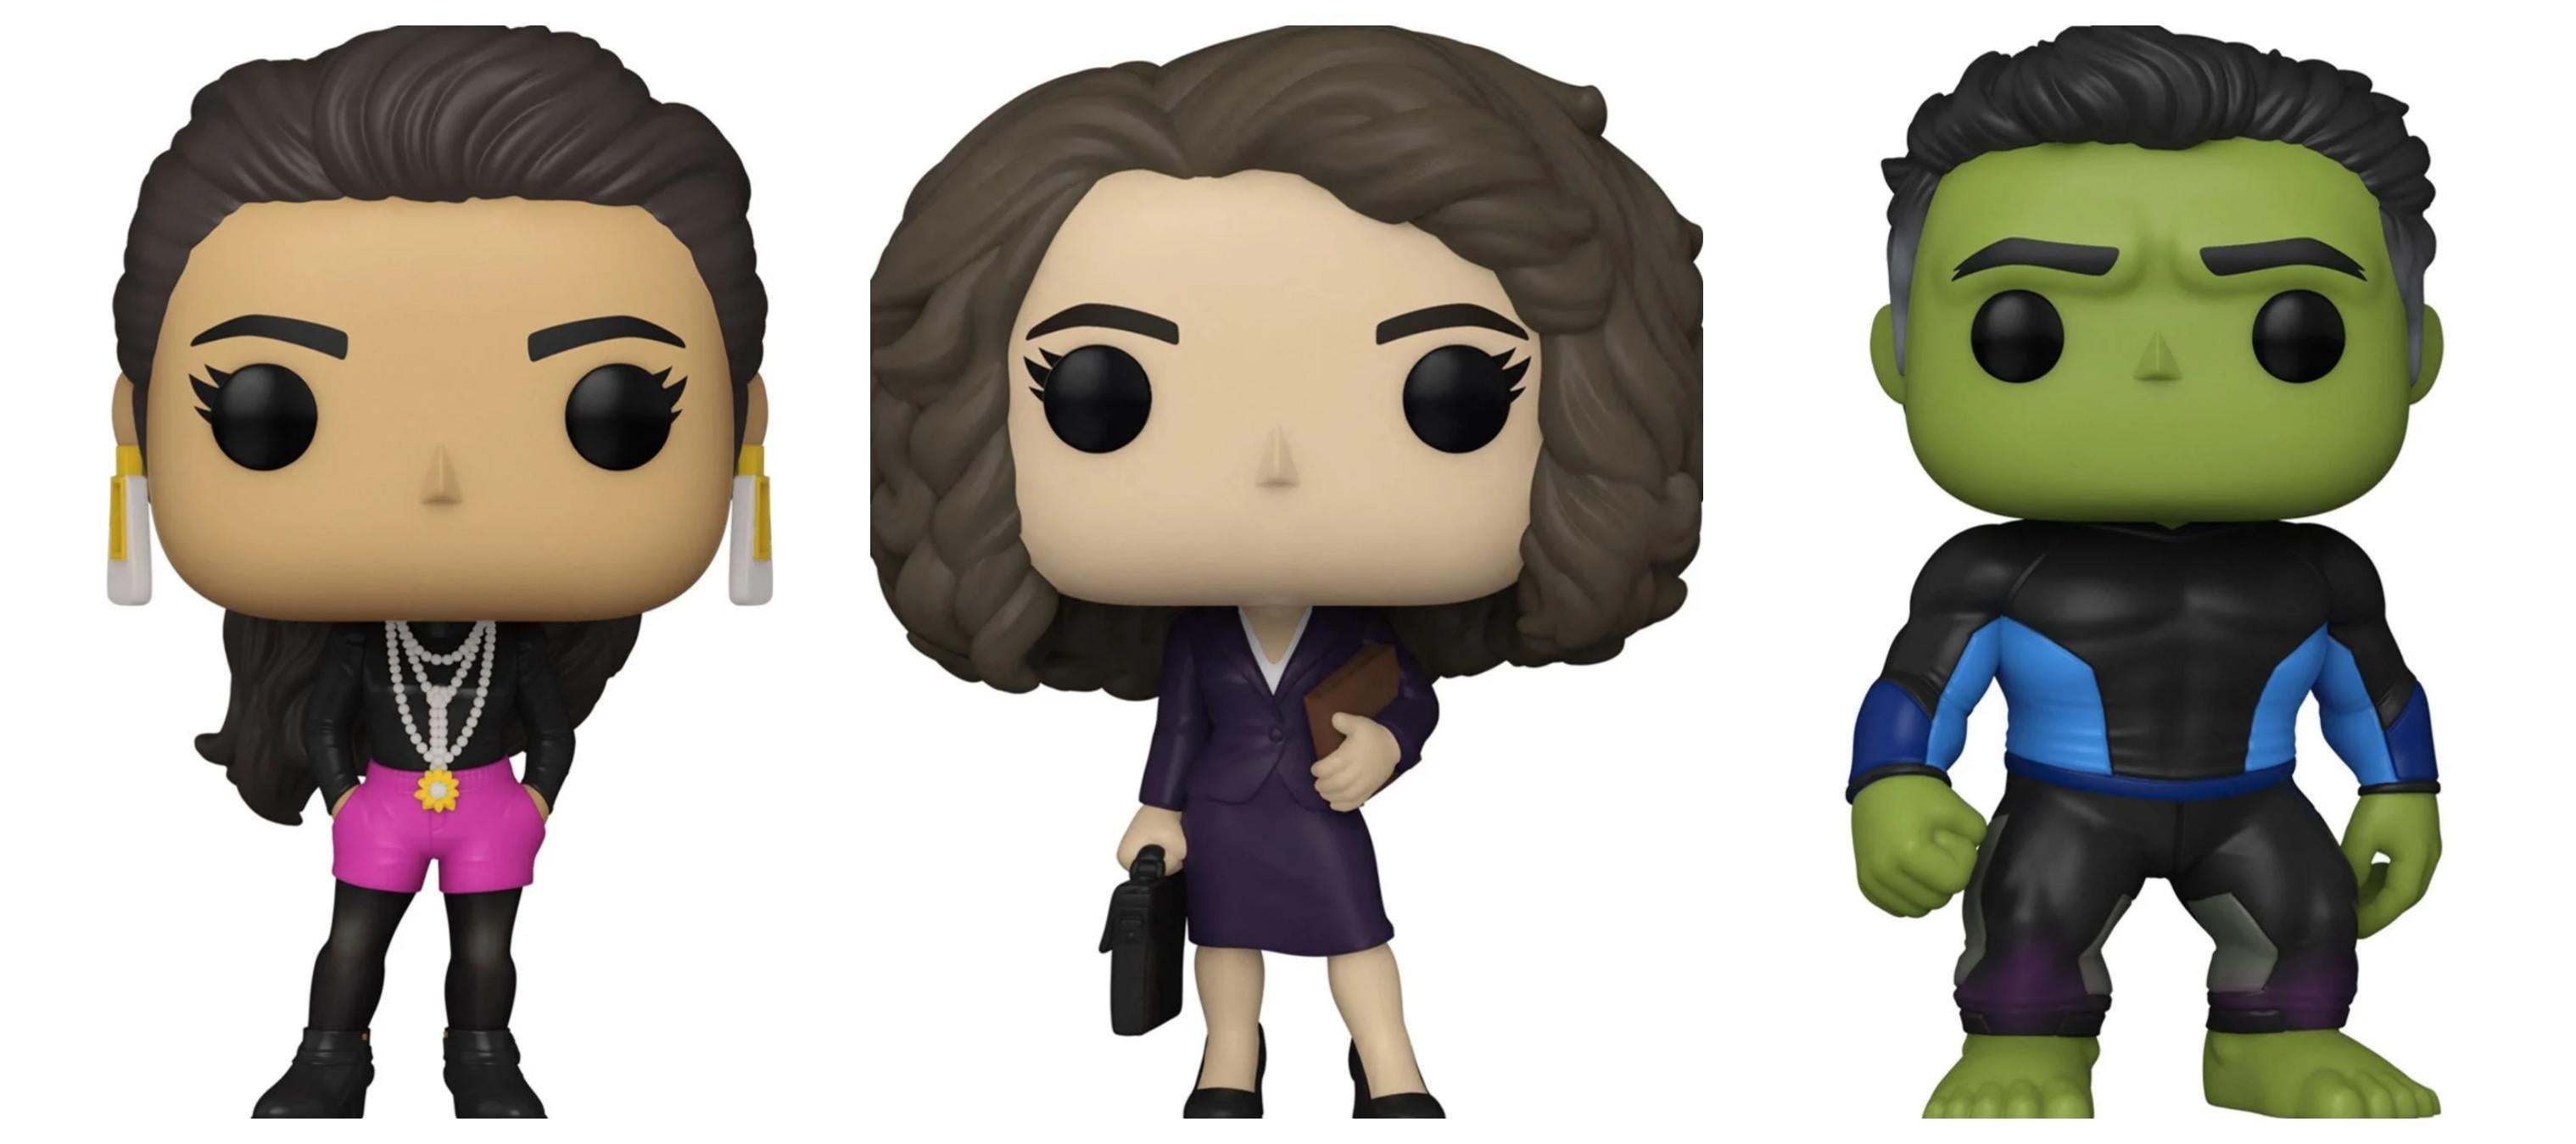 Attorney At Law Funko Pops Have Arrived on Schedule